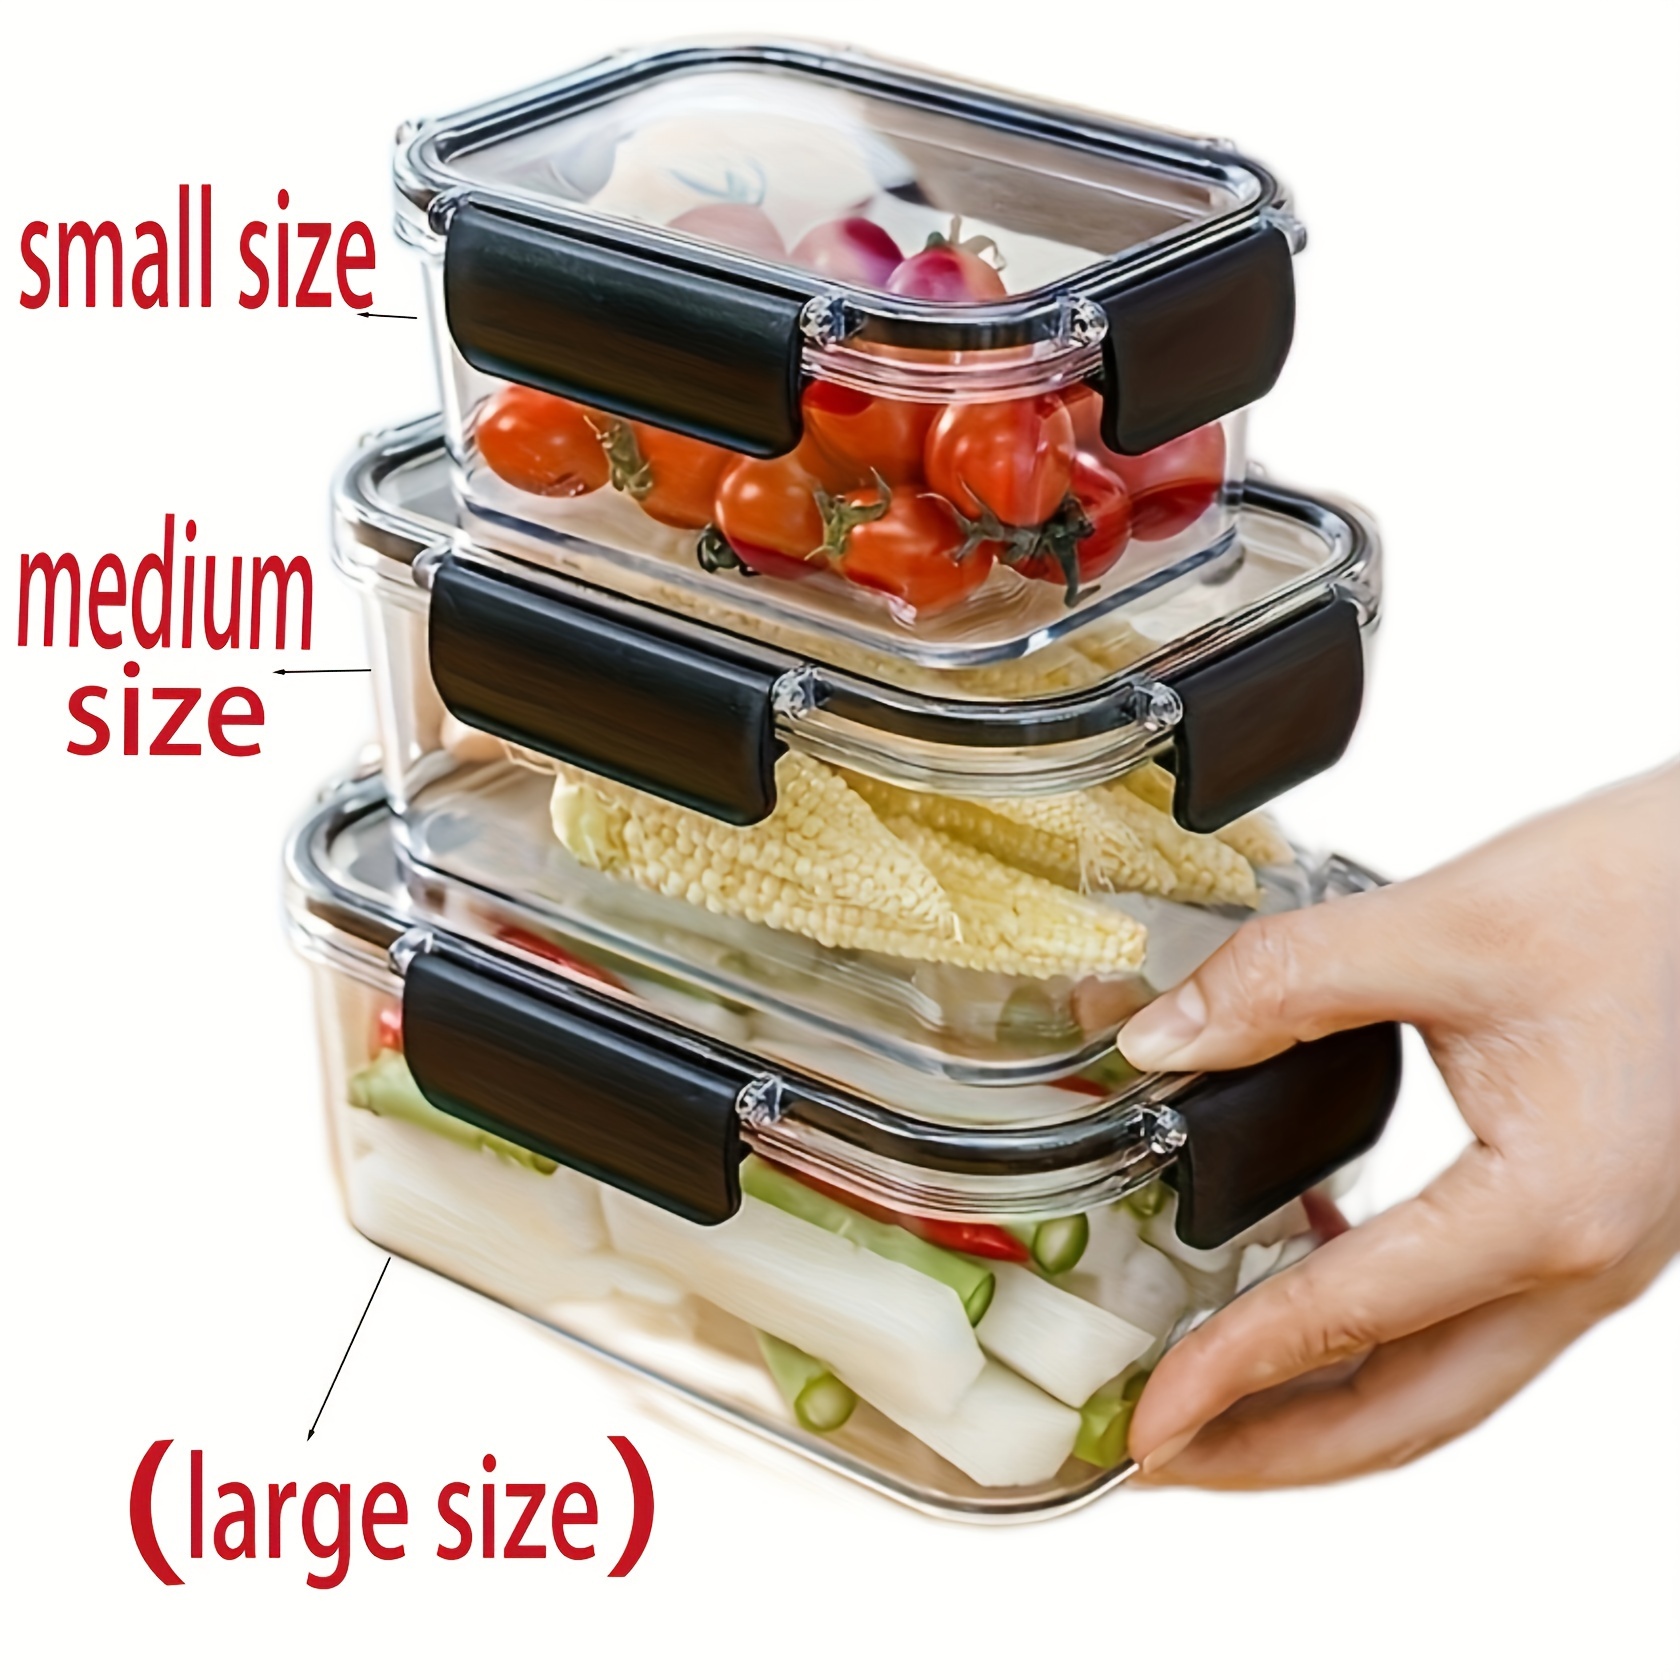 6pcs, Bento Box Sauce Container With Lid, 1.69oz Small Salad Dressing  Container With Lids, Reusable Sauce Cup, Stainless Steel Containers For  Lunch B